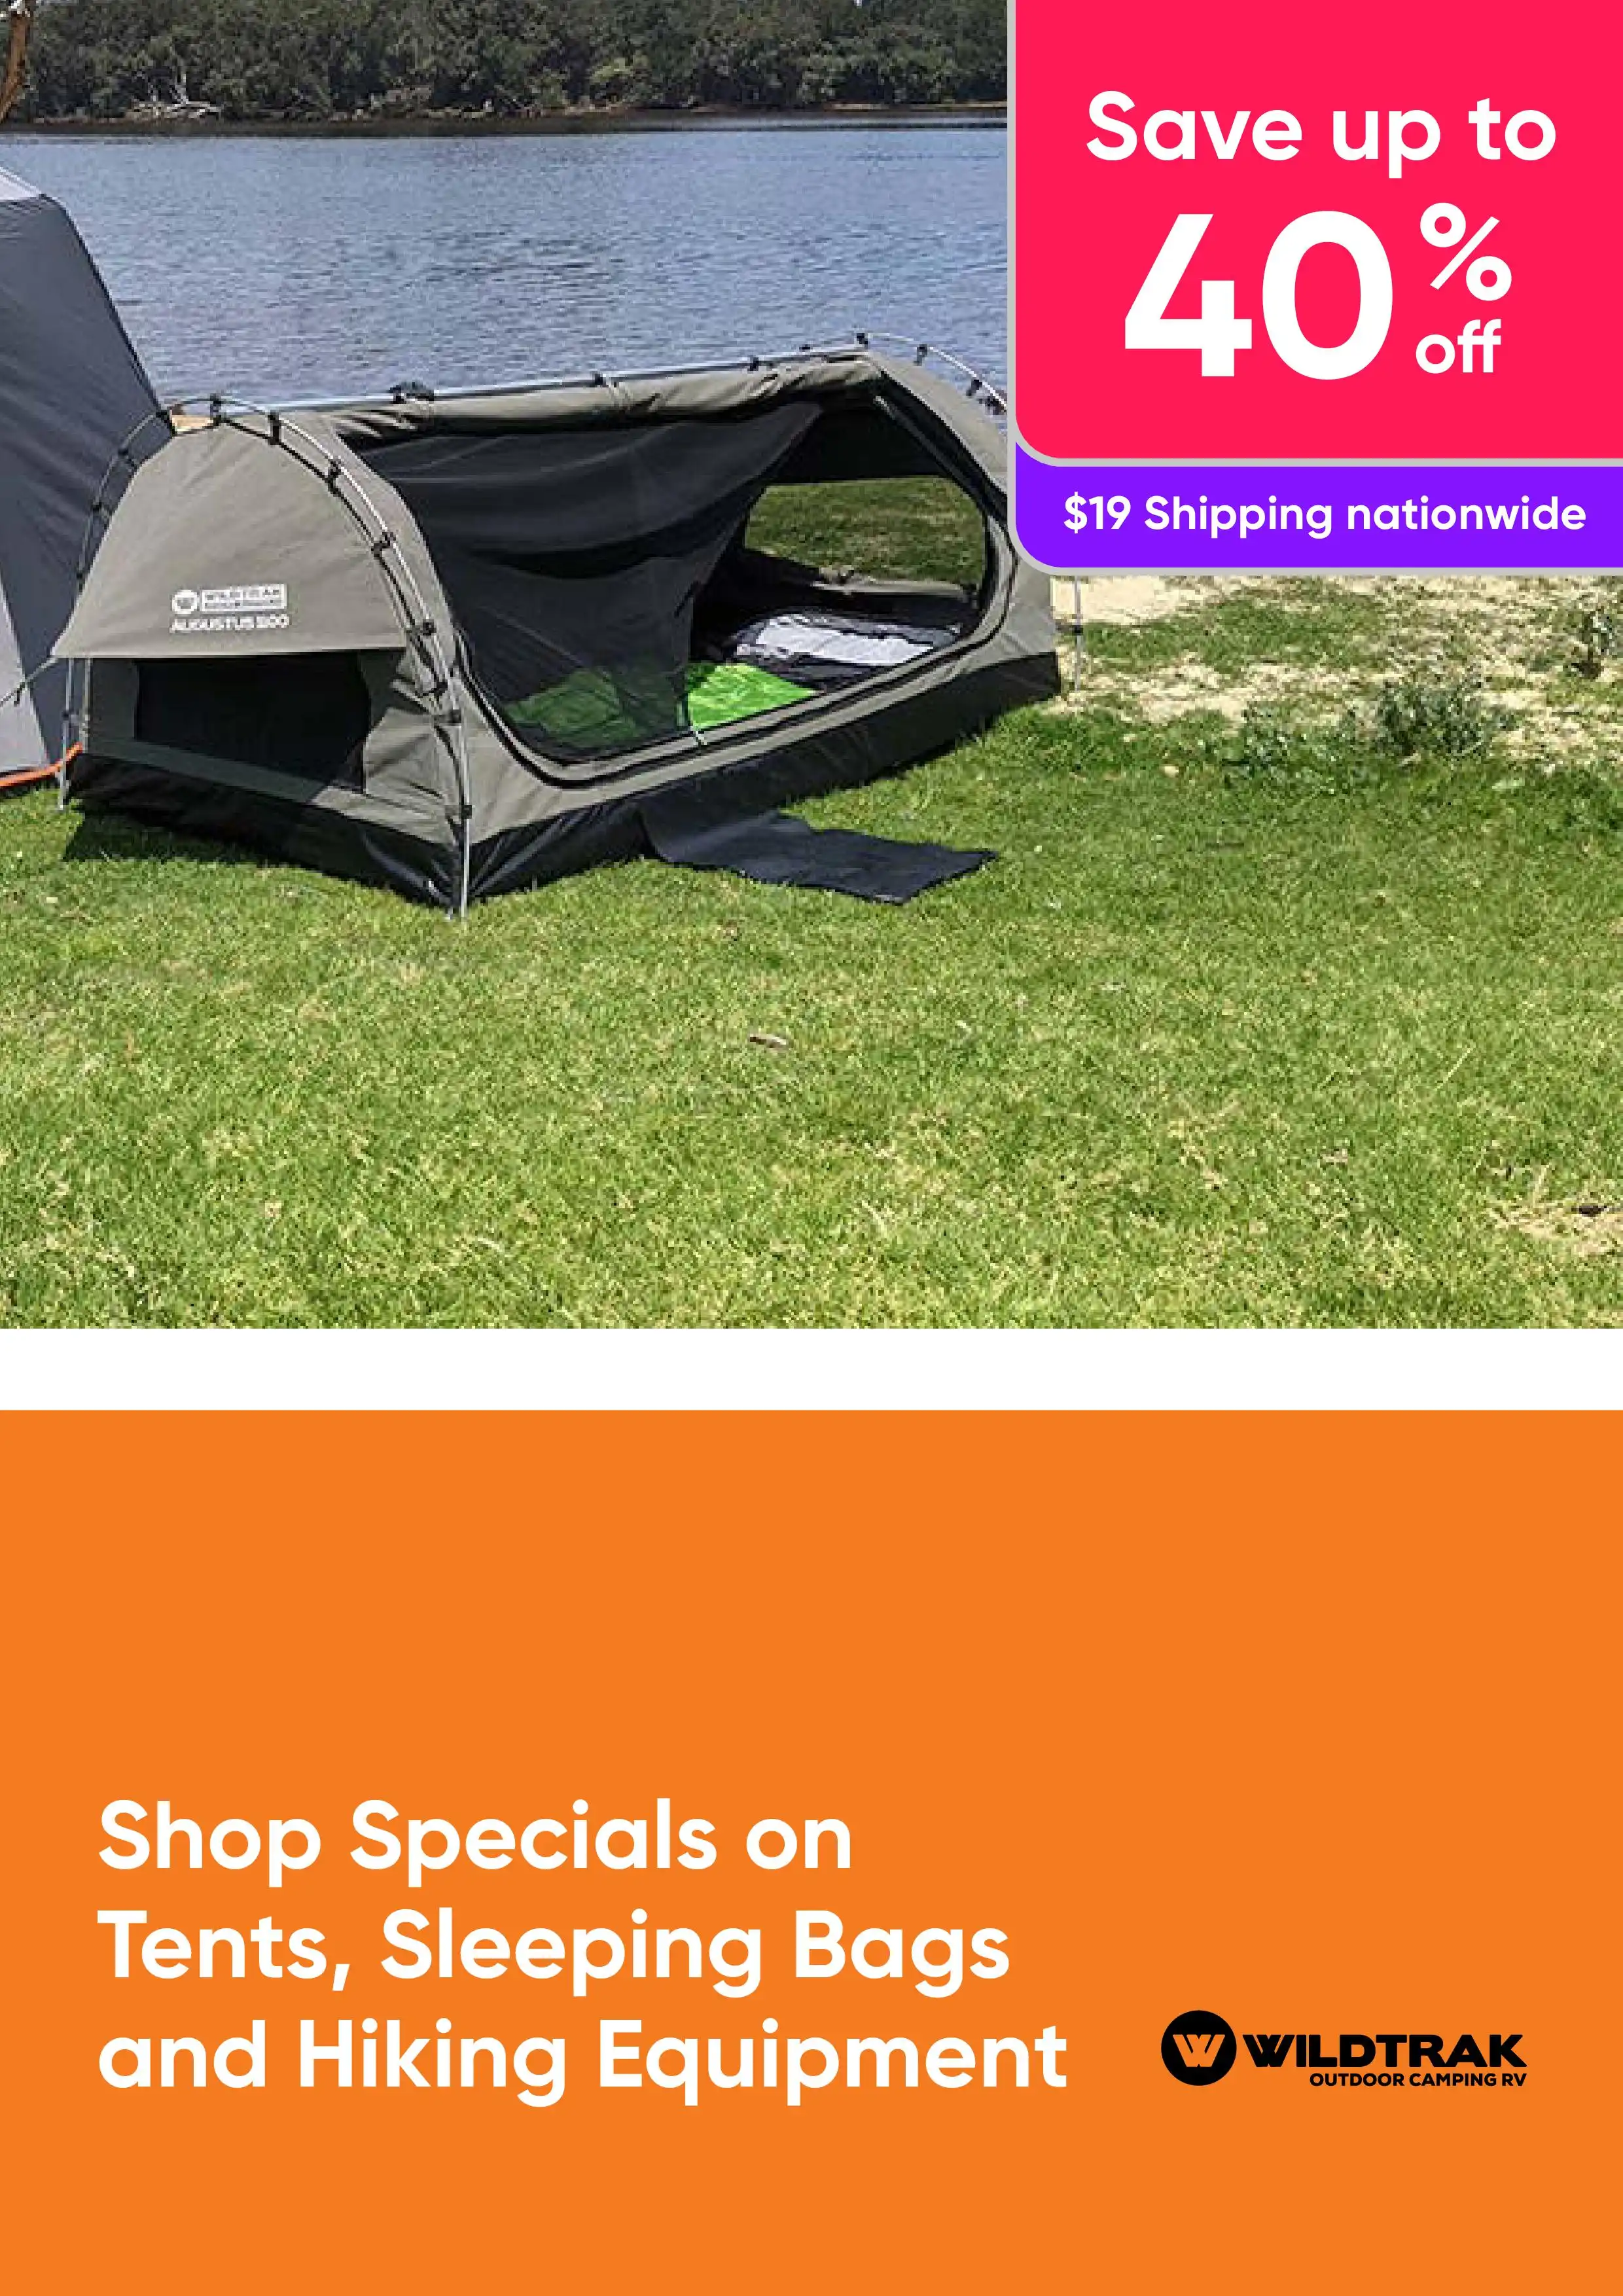 Camping and Hiking Essentials - Shop Specials on Tents, Sleeping Bags and Hiking Equipment